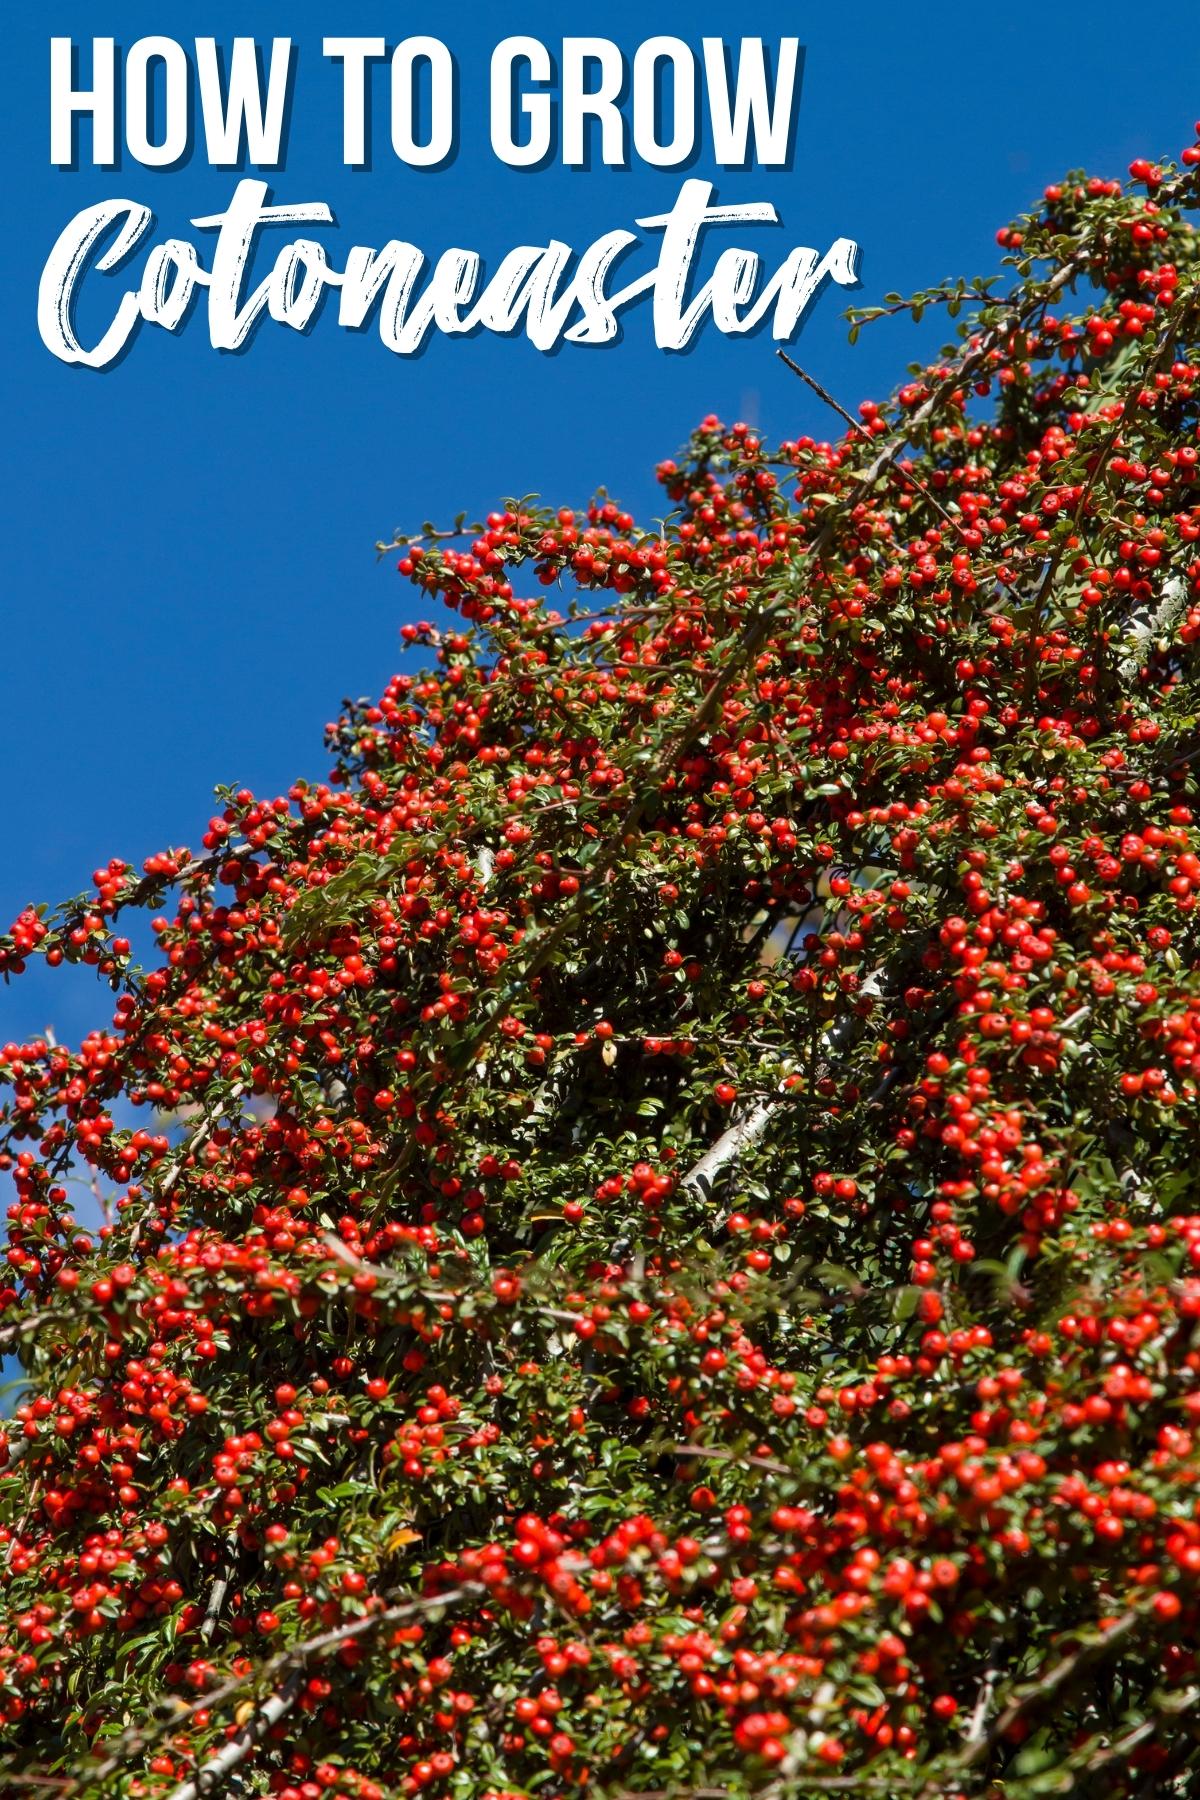 how to grow cotoneaster text overlay on image of cotoneaster shrub